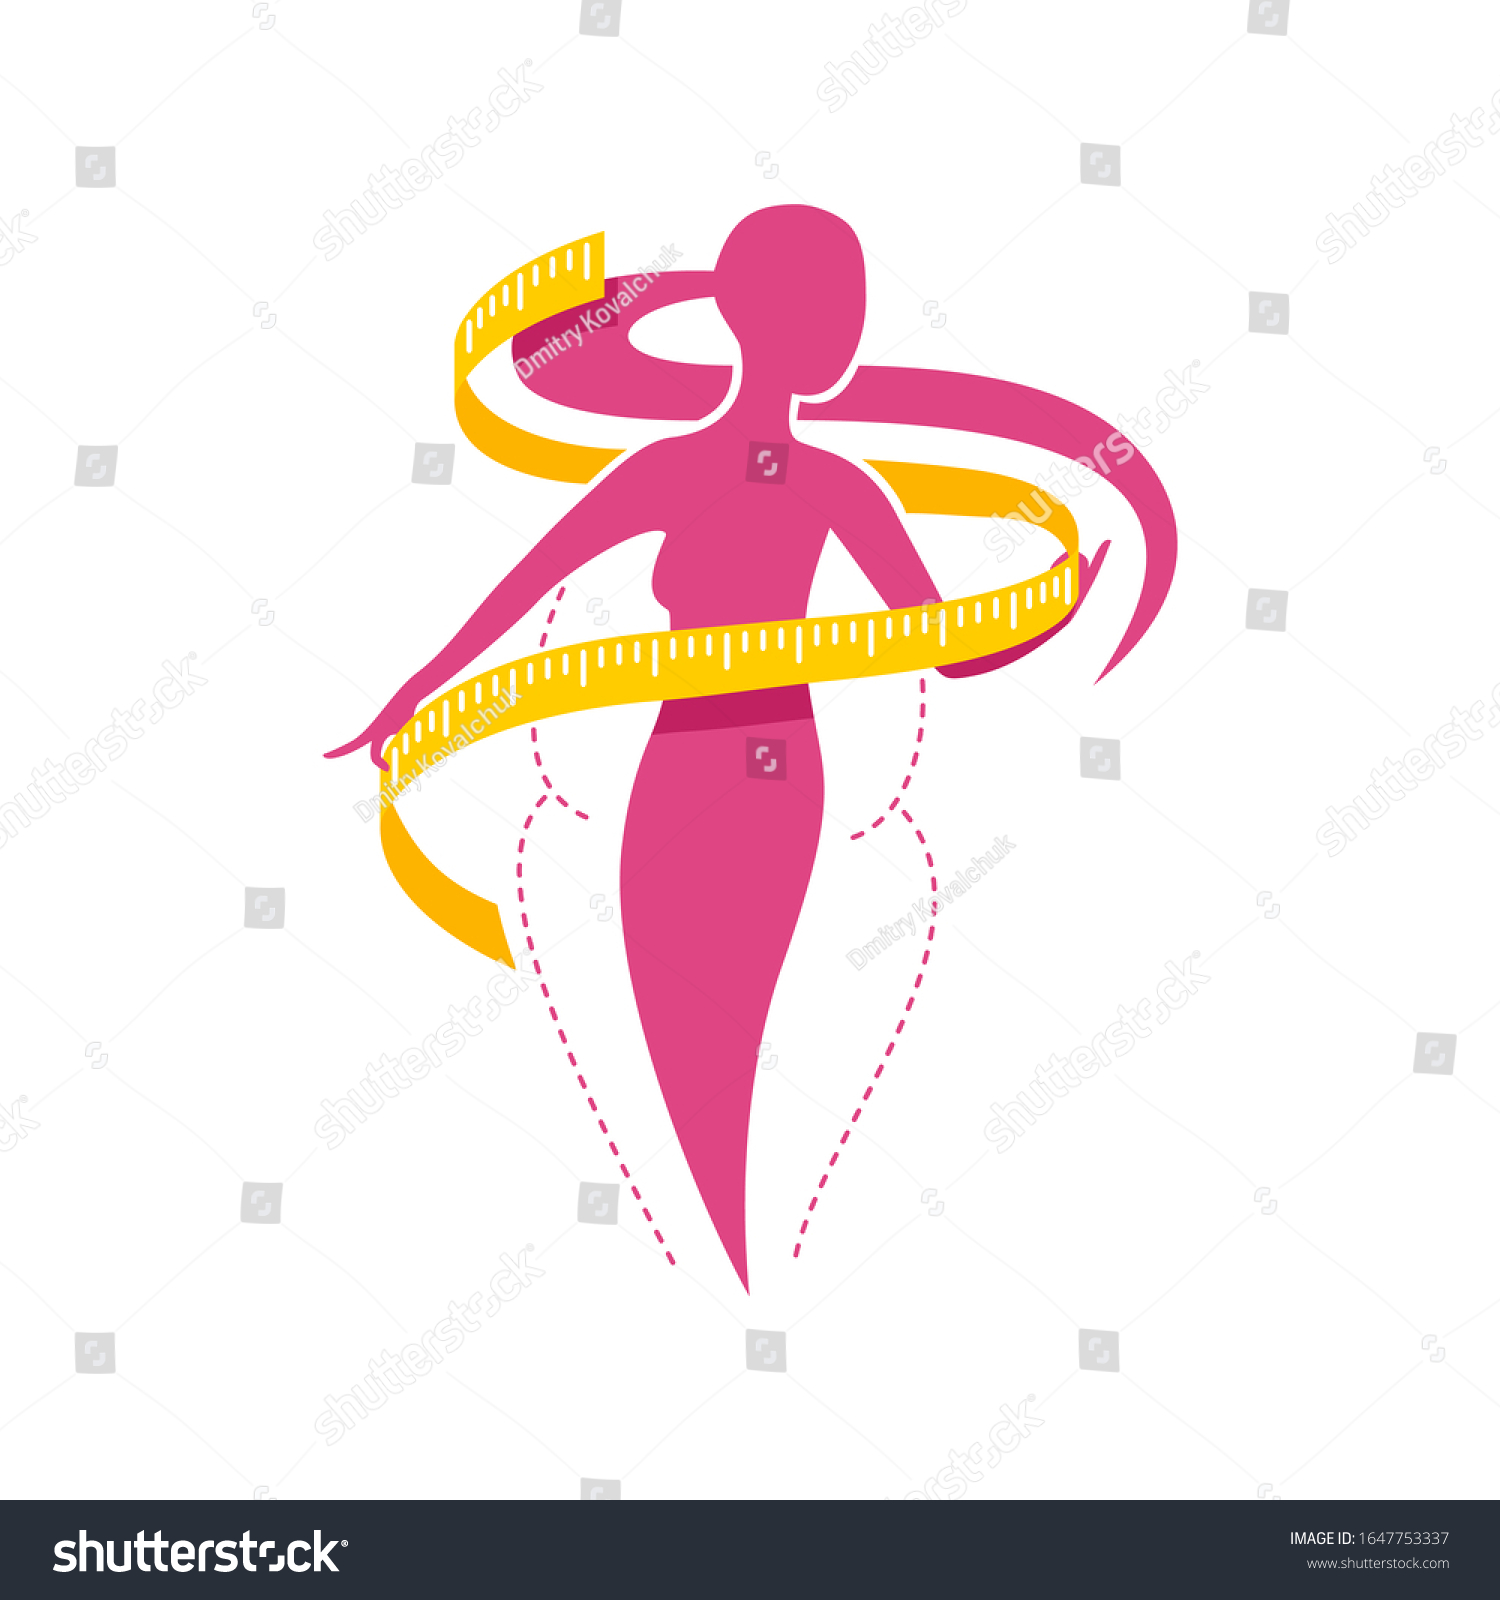 SVG of Weight loss concept - diet program logo (isolated icon) in form of abstract woman silhouette (fat and shapely figure) with measuring tape around  svg